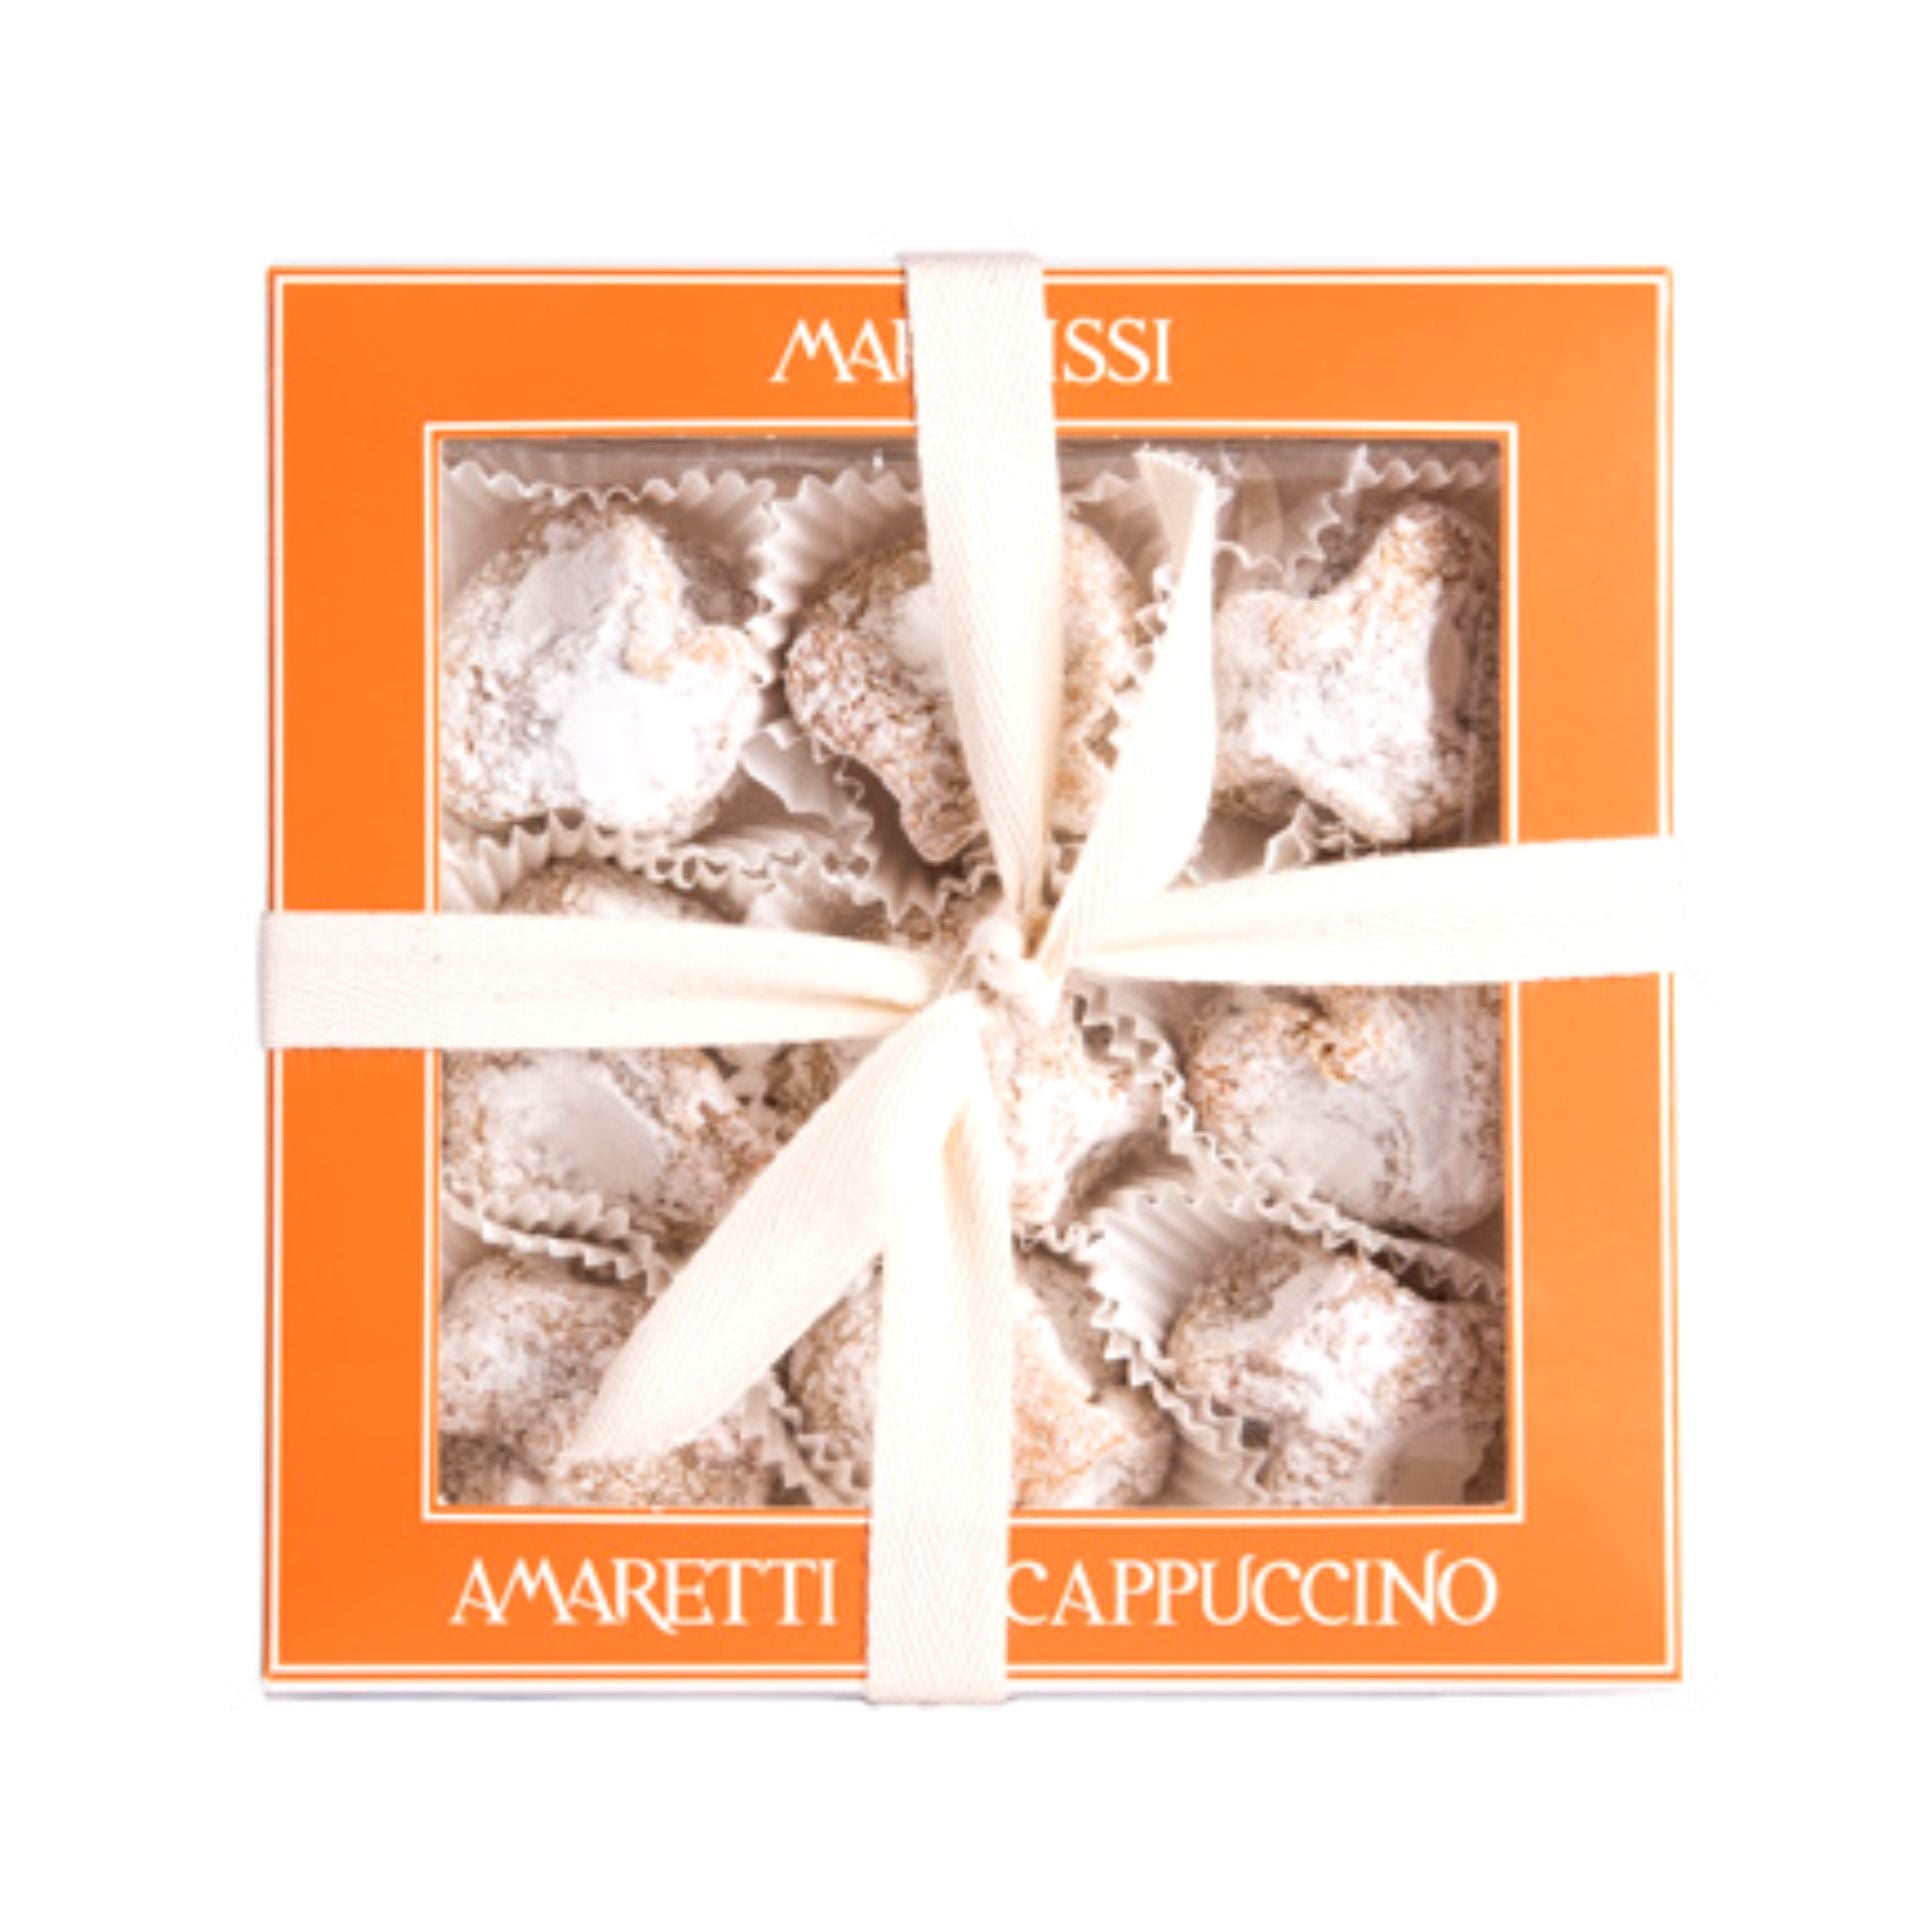 Marabissi Soft Cappuccino Amaretti (Box) 190g  | Imported and distributed in the UK by Just Gourmet Foods